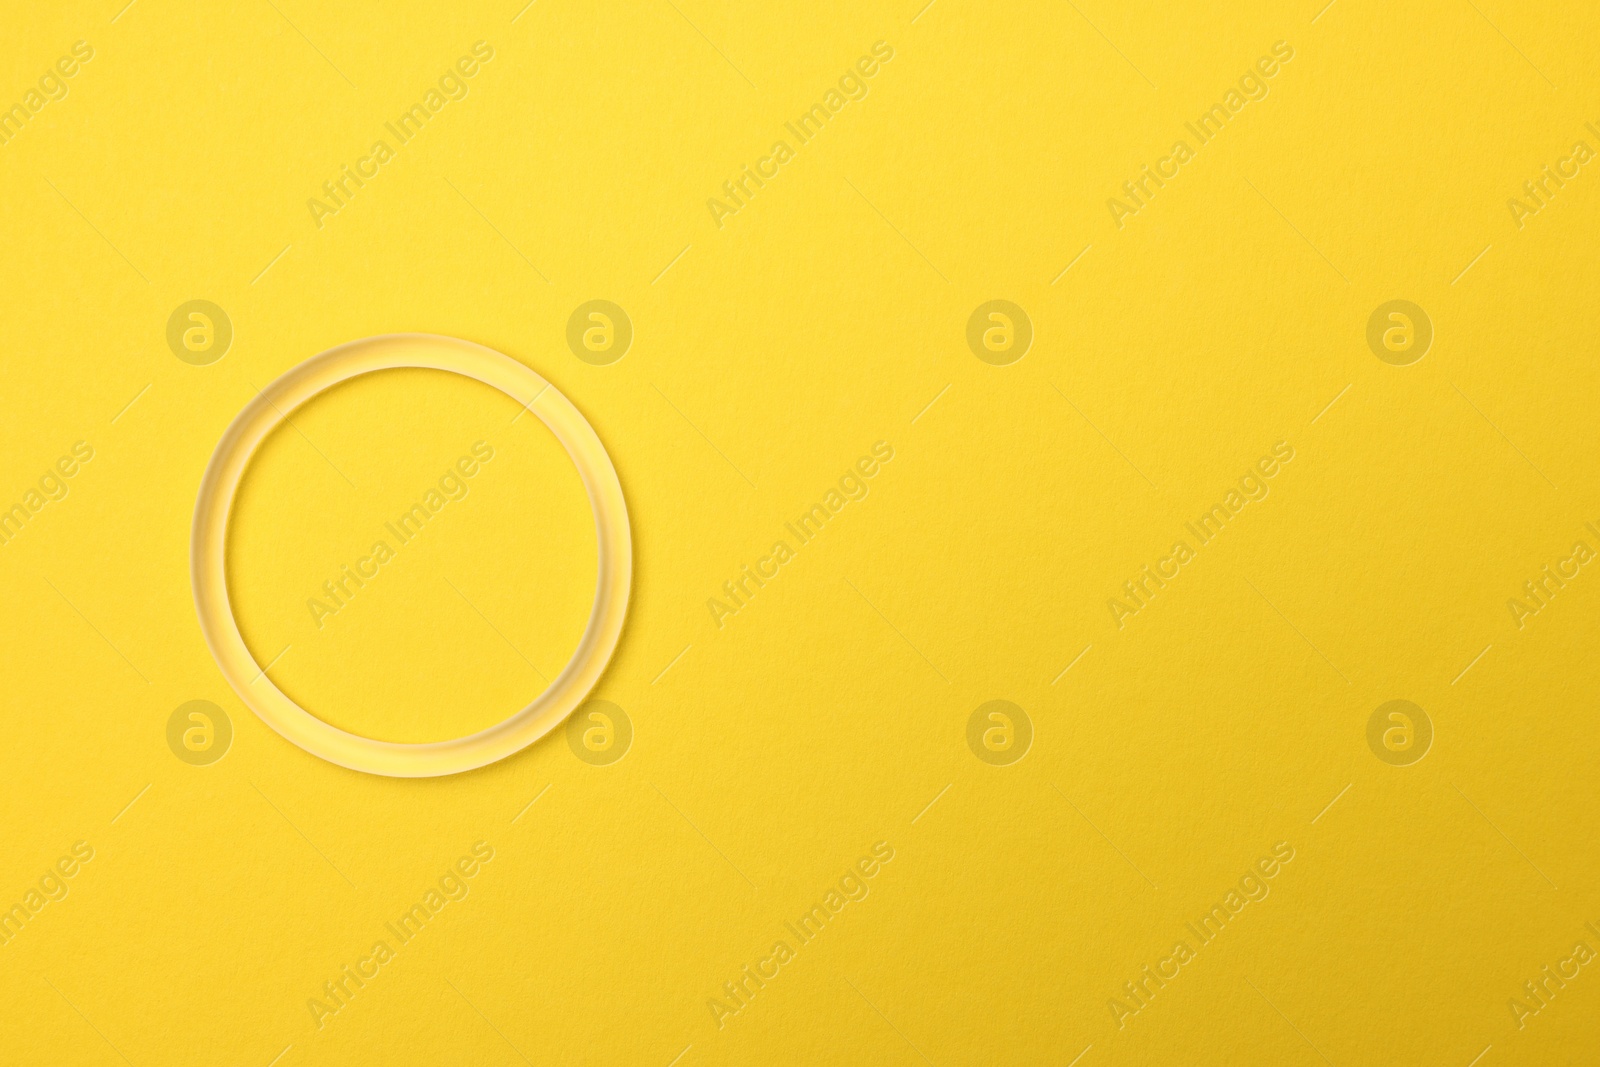 Photo of Diaphragm vaginal contraceptive ring on yellow background, top view. Space for text